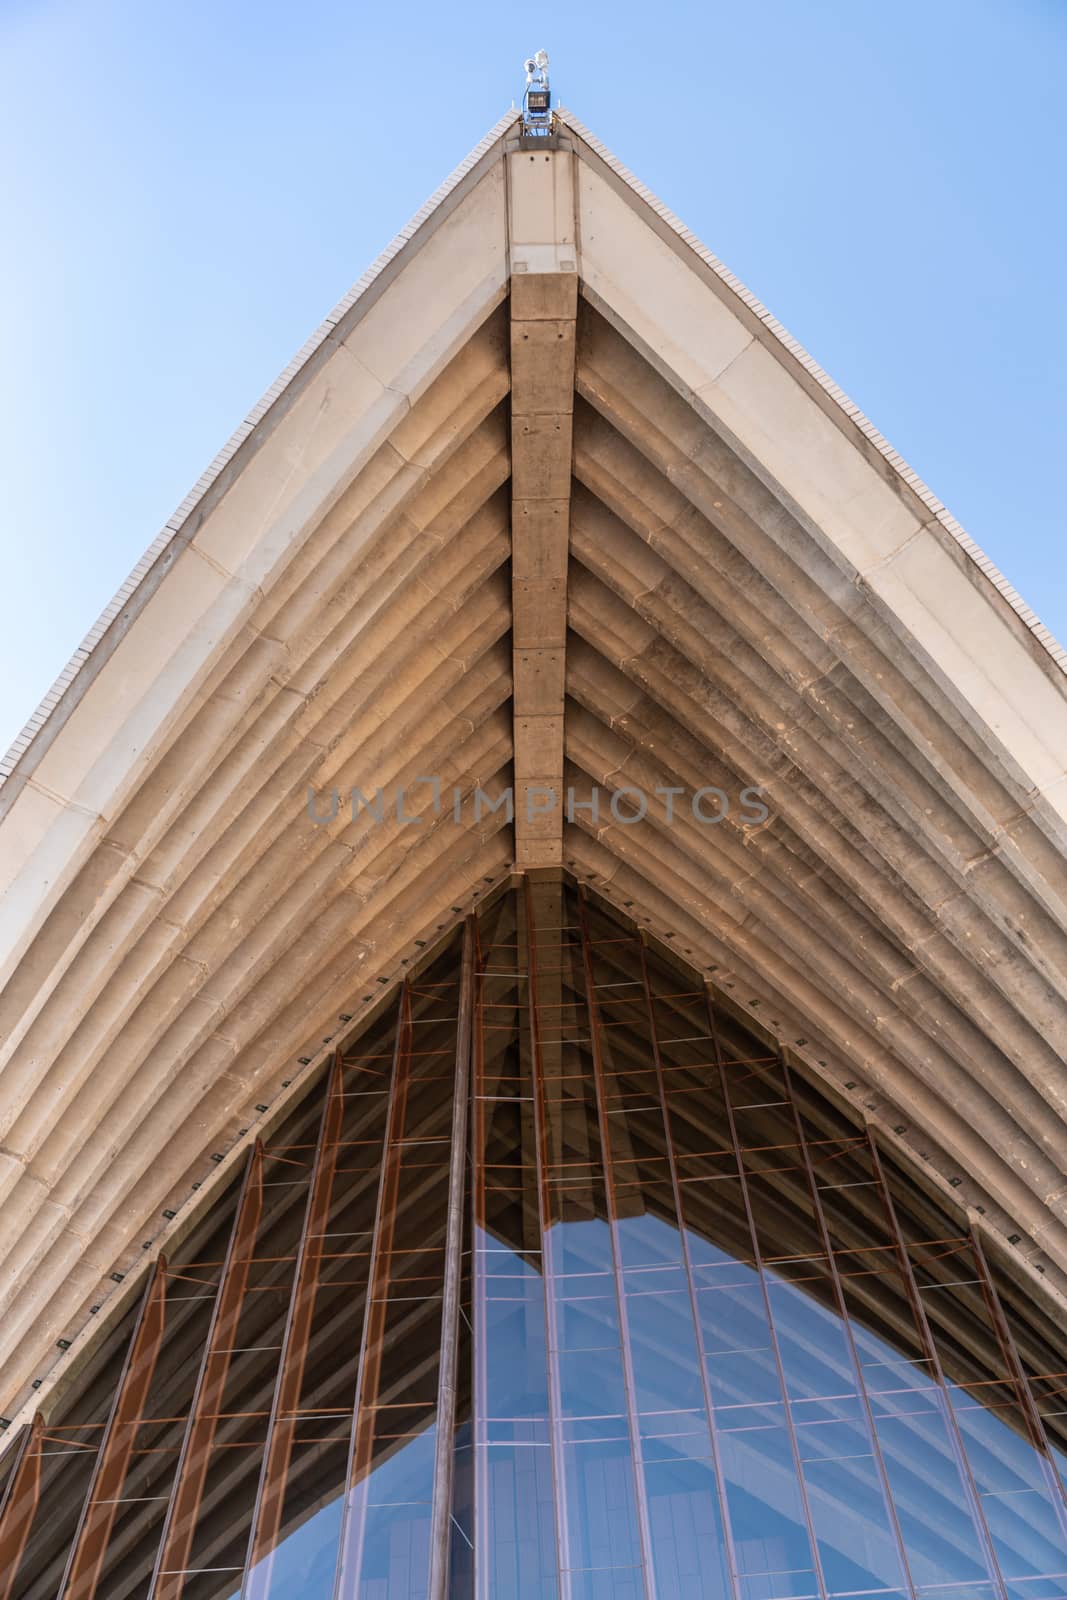 Sydney, Australia - February 11, 2019: Detail of white roof structure of Sydney Opera House against deep blue sky. 8 of 12.